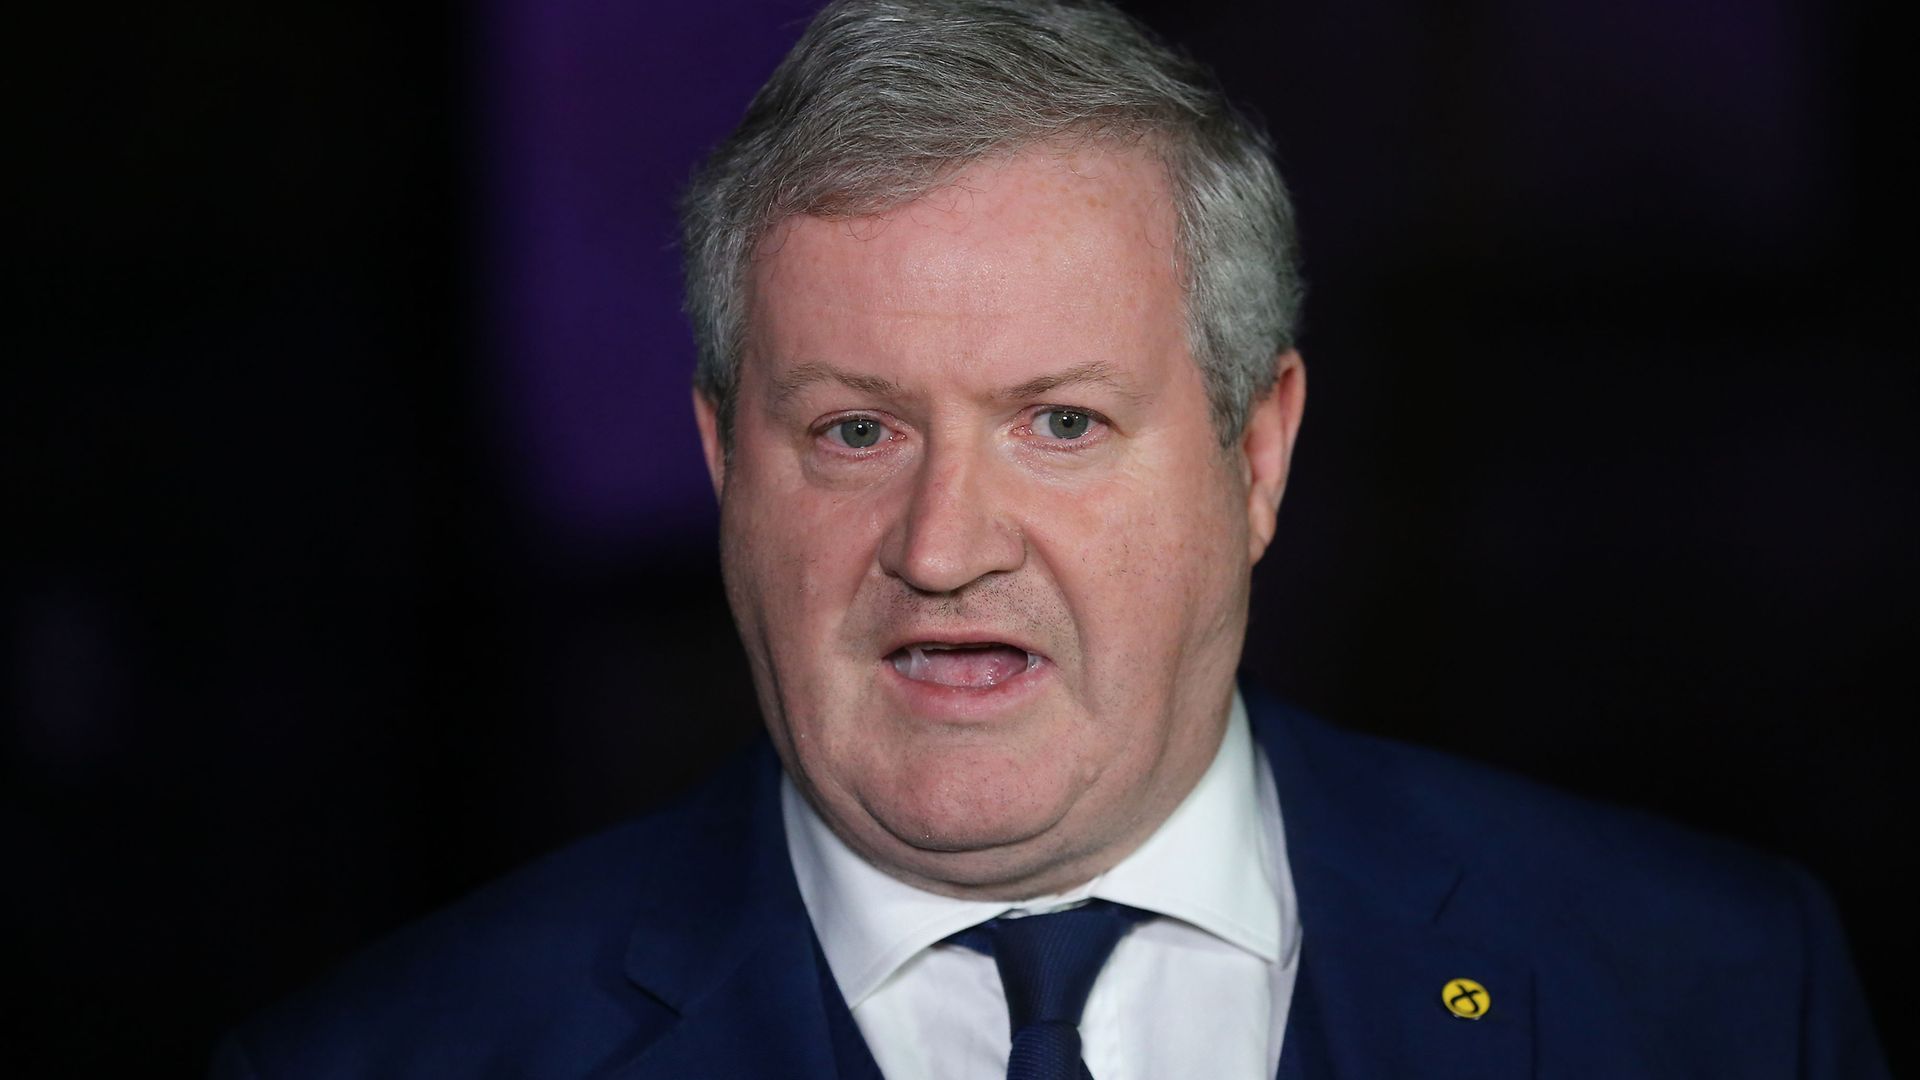 SNP Westminster leader Ian Blackford (pictured above) said his party would "look constructively" at Boris Johnson's proposals for a Covid passport scheme - Credit: PA